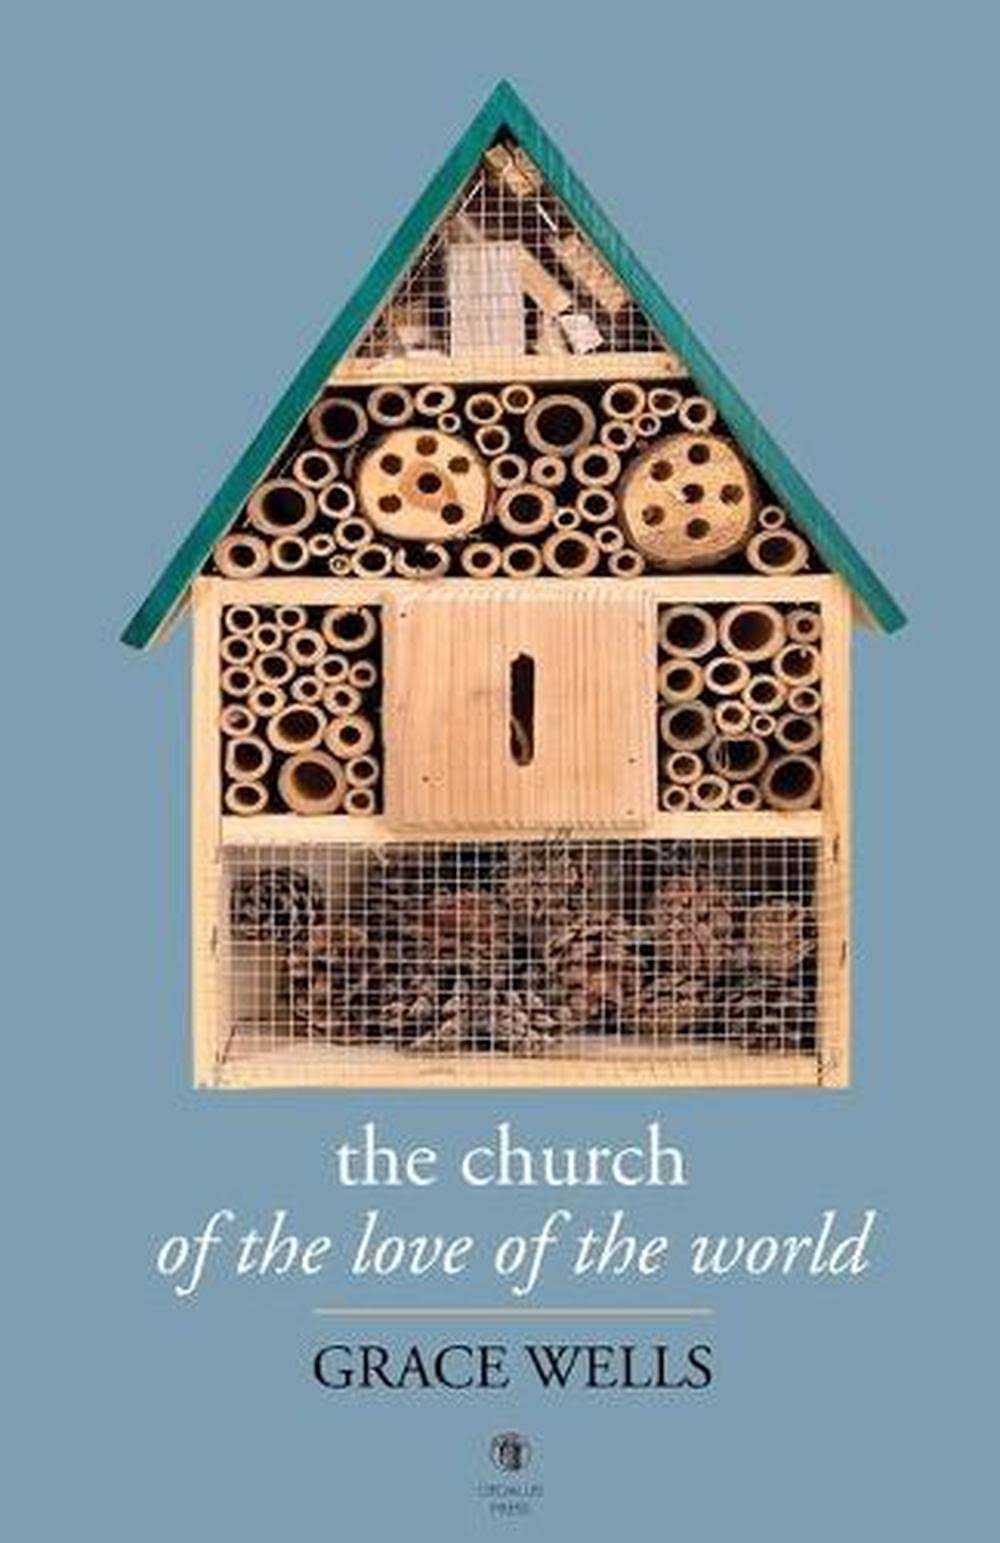 The Church of The Love of The World by Grace Wells